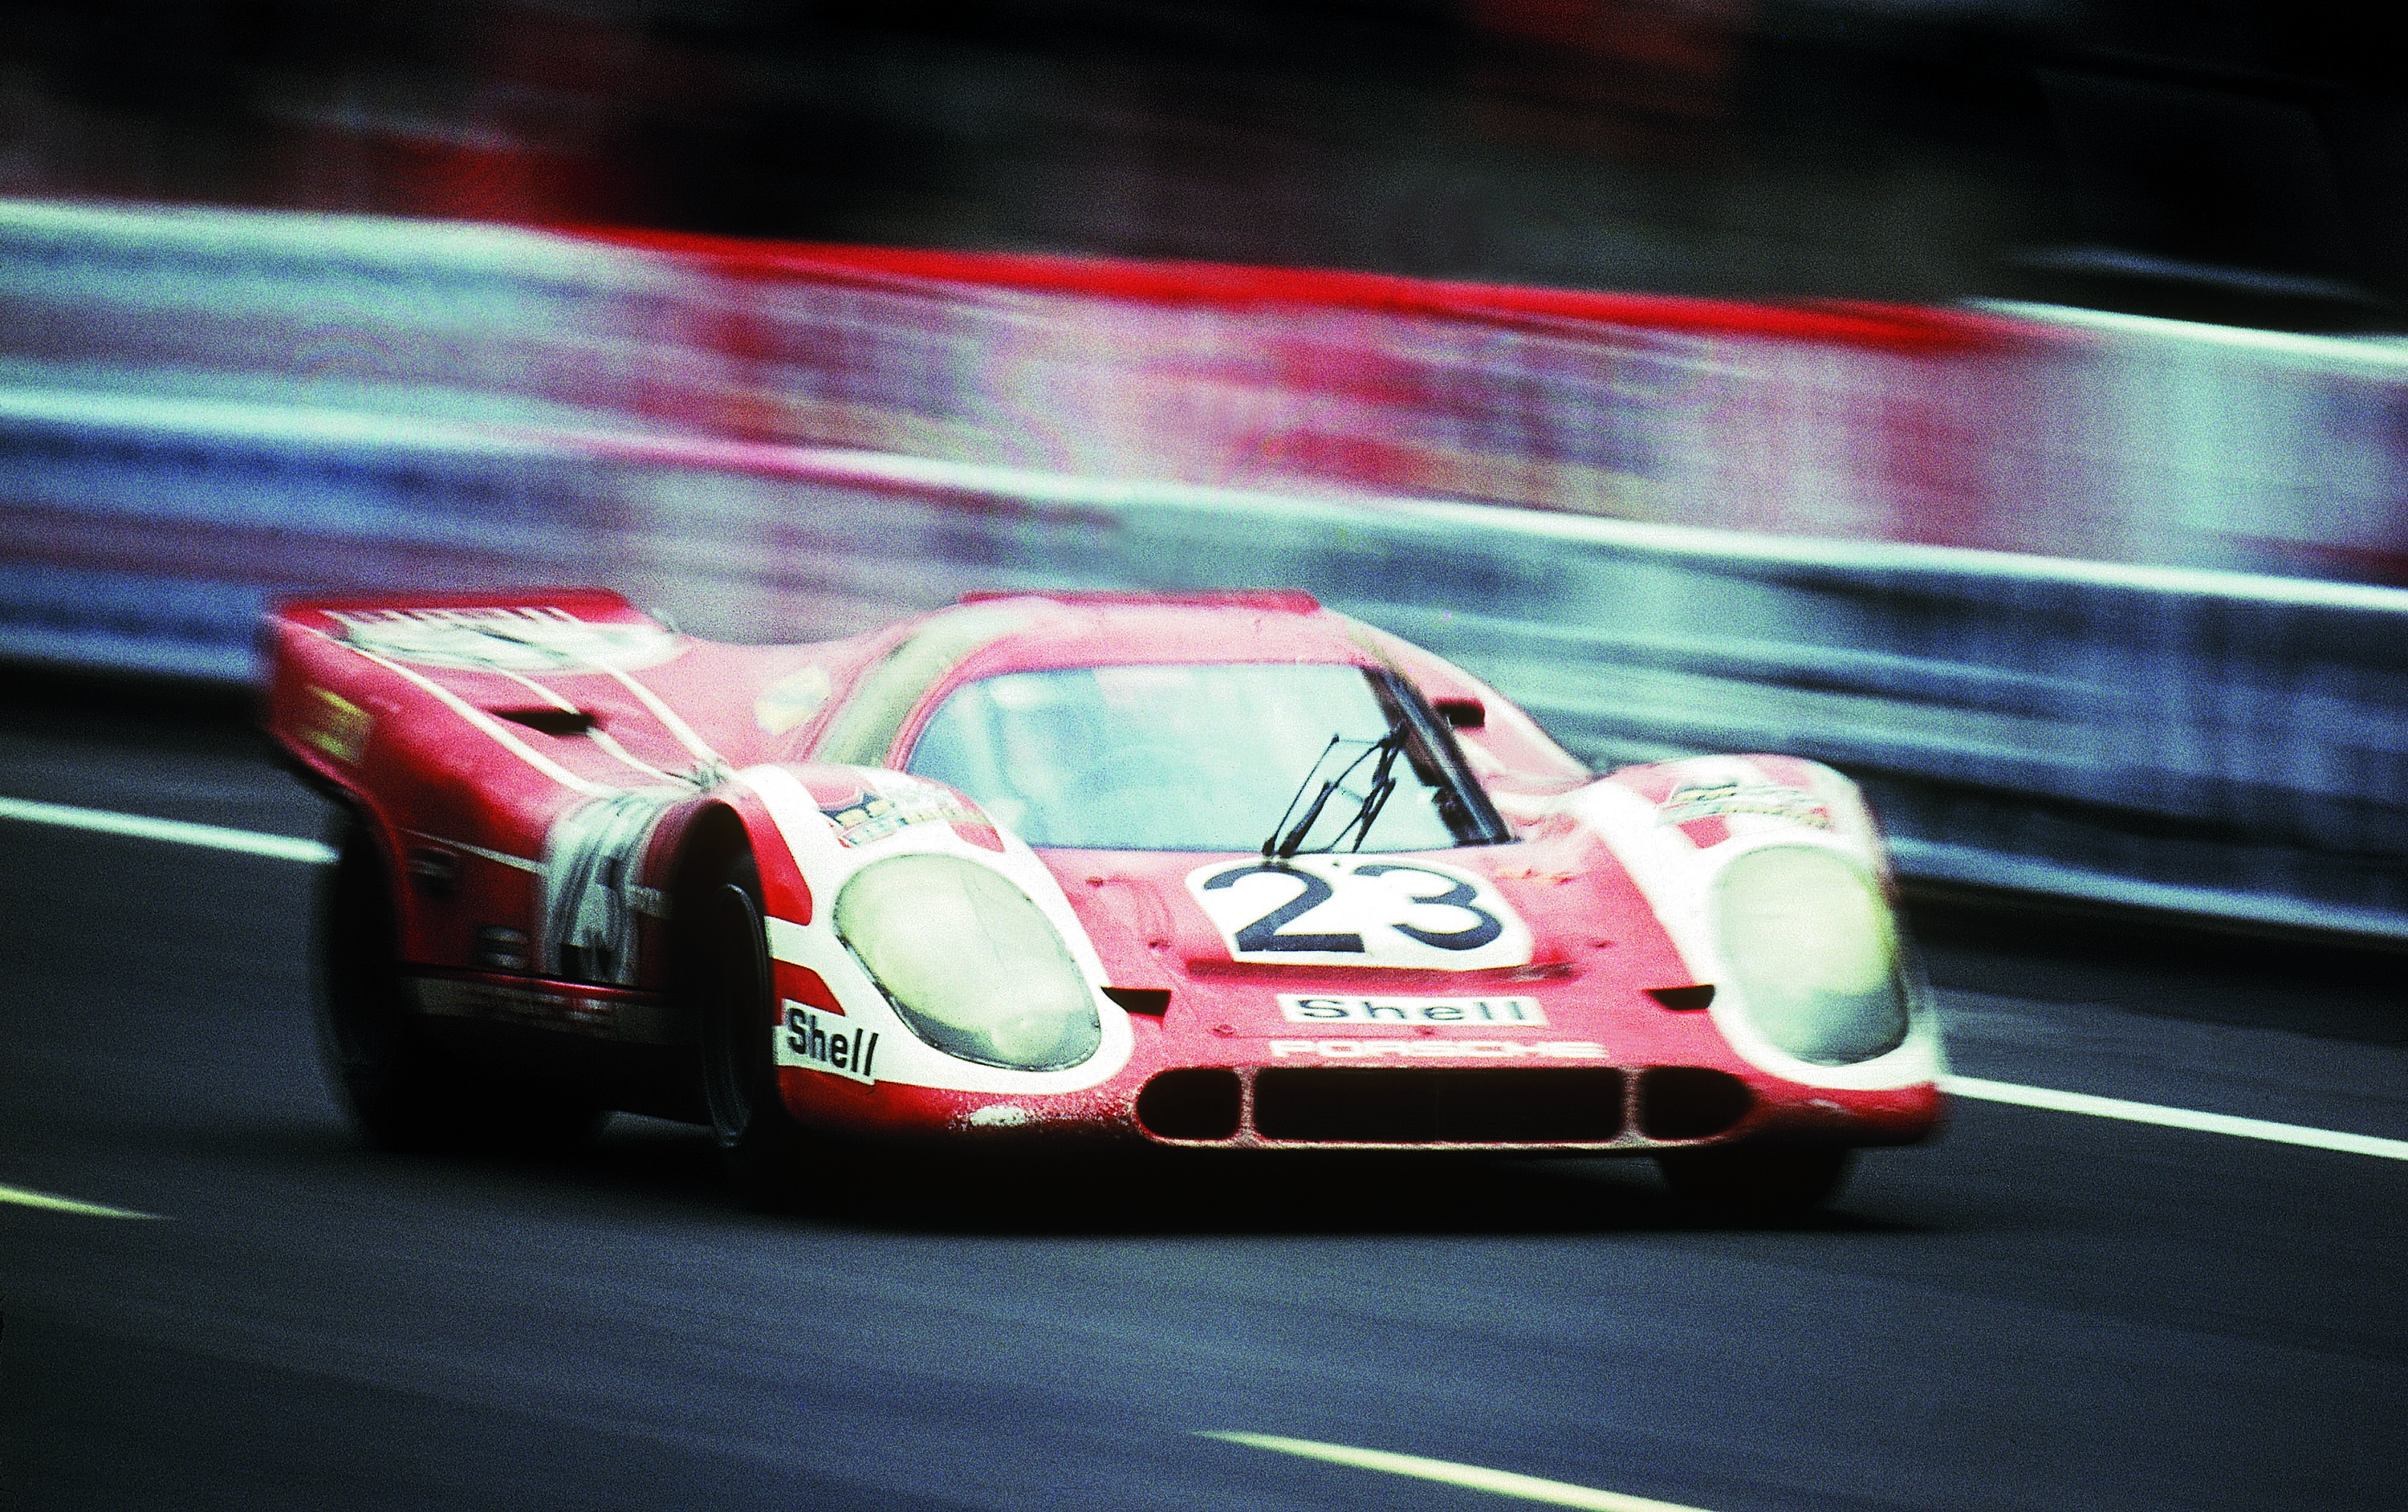 The legend on track at Le Mans...